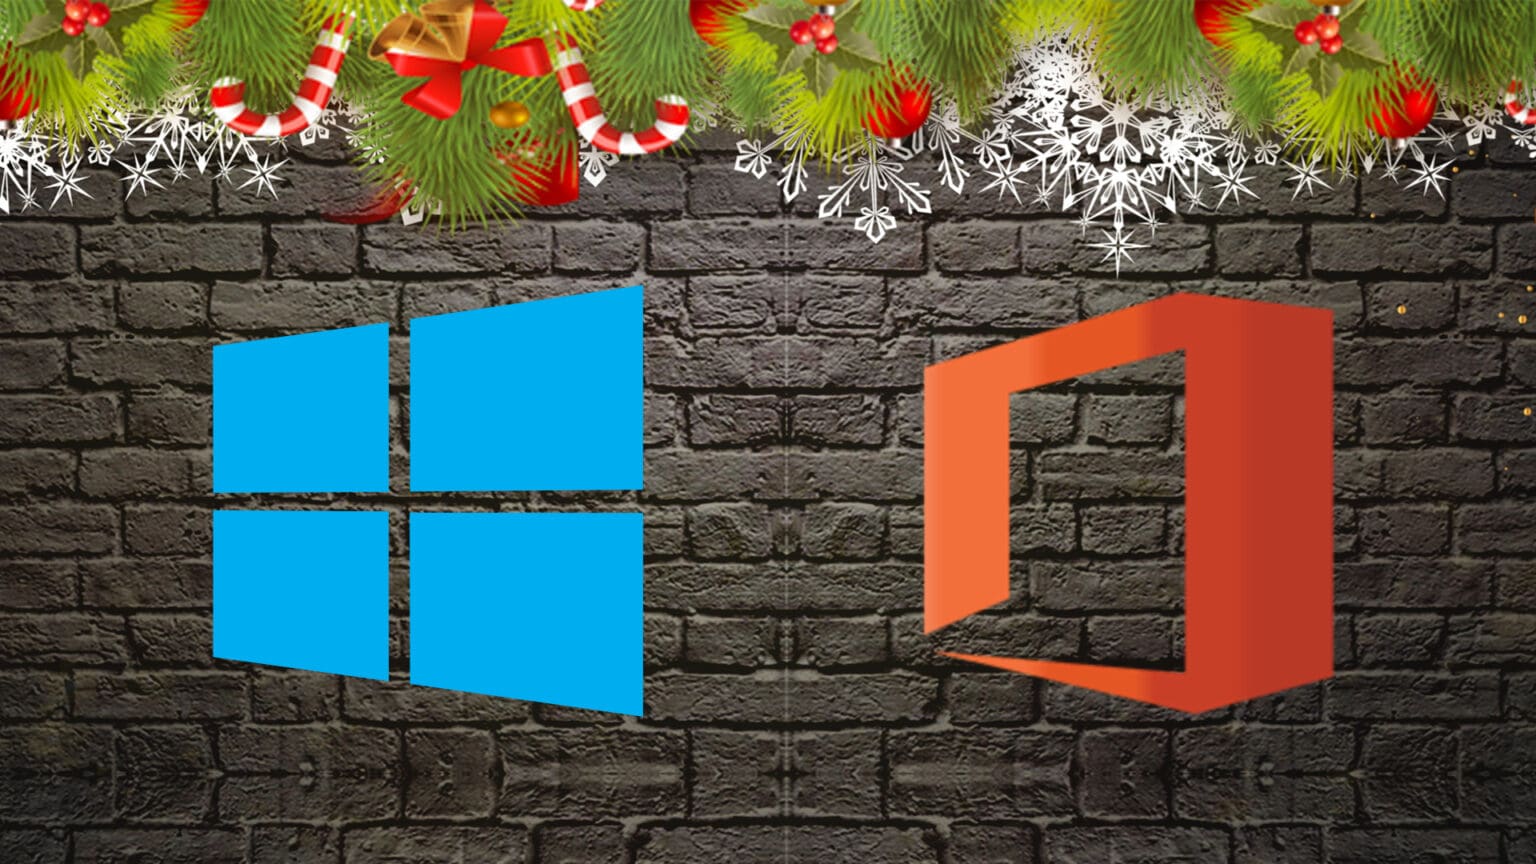 In the CdkeySales Christmas Sale, you can get Windows 10 for $15 and a free upgrade to Windows 11.